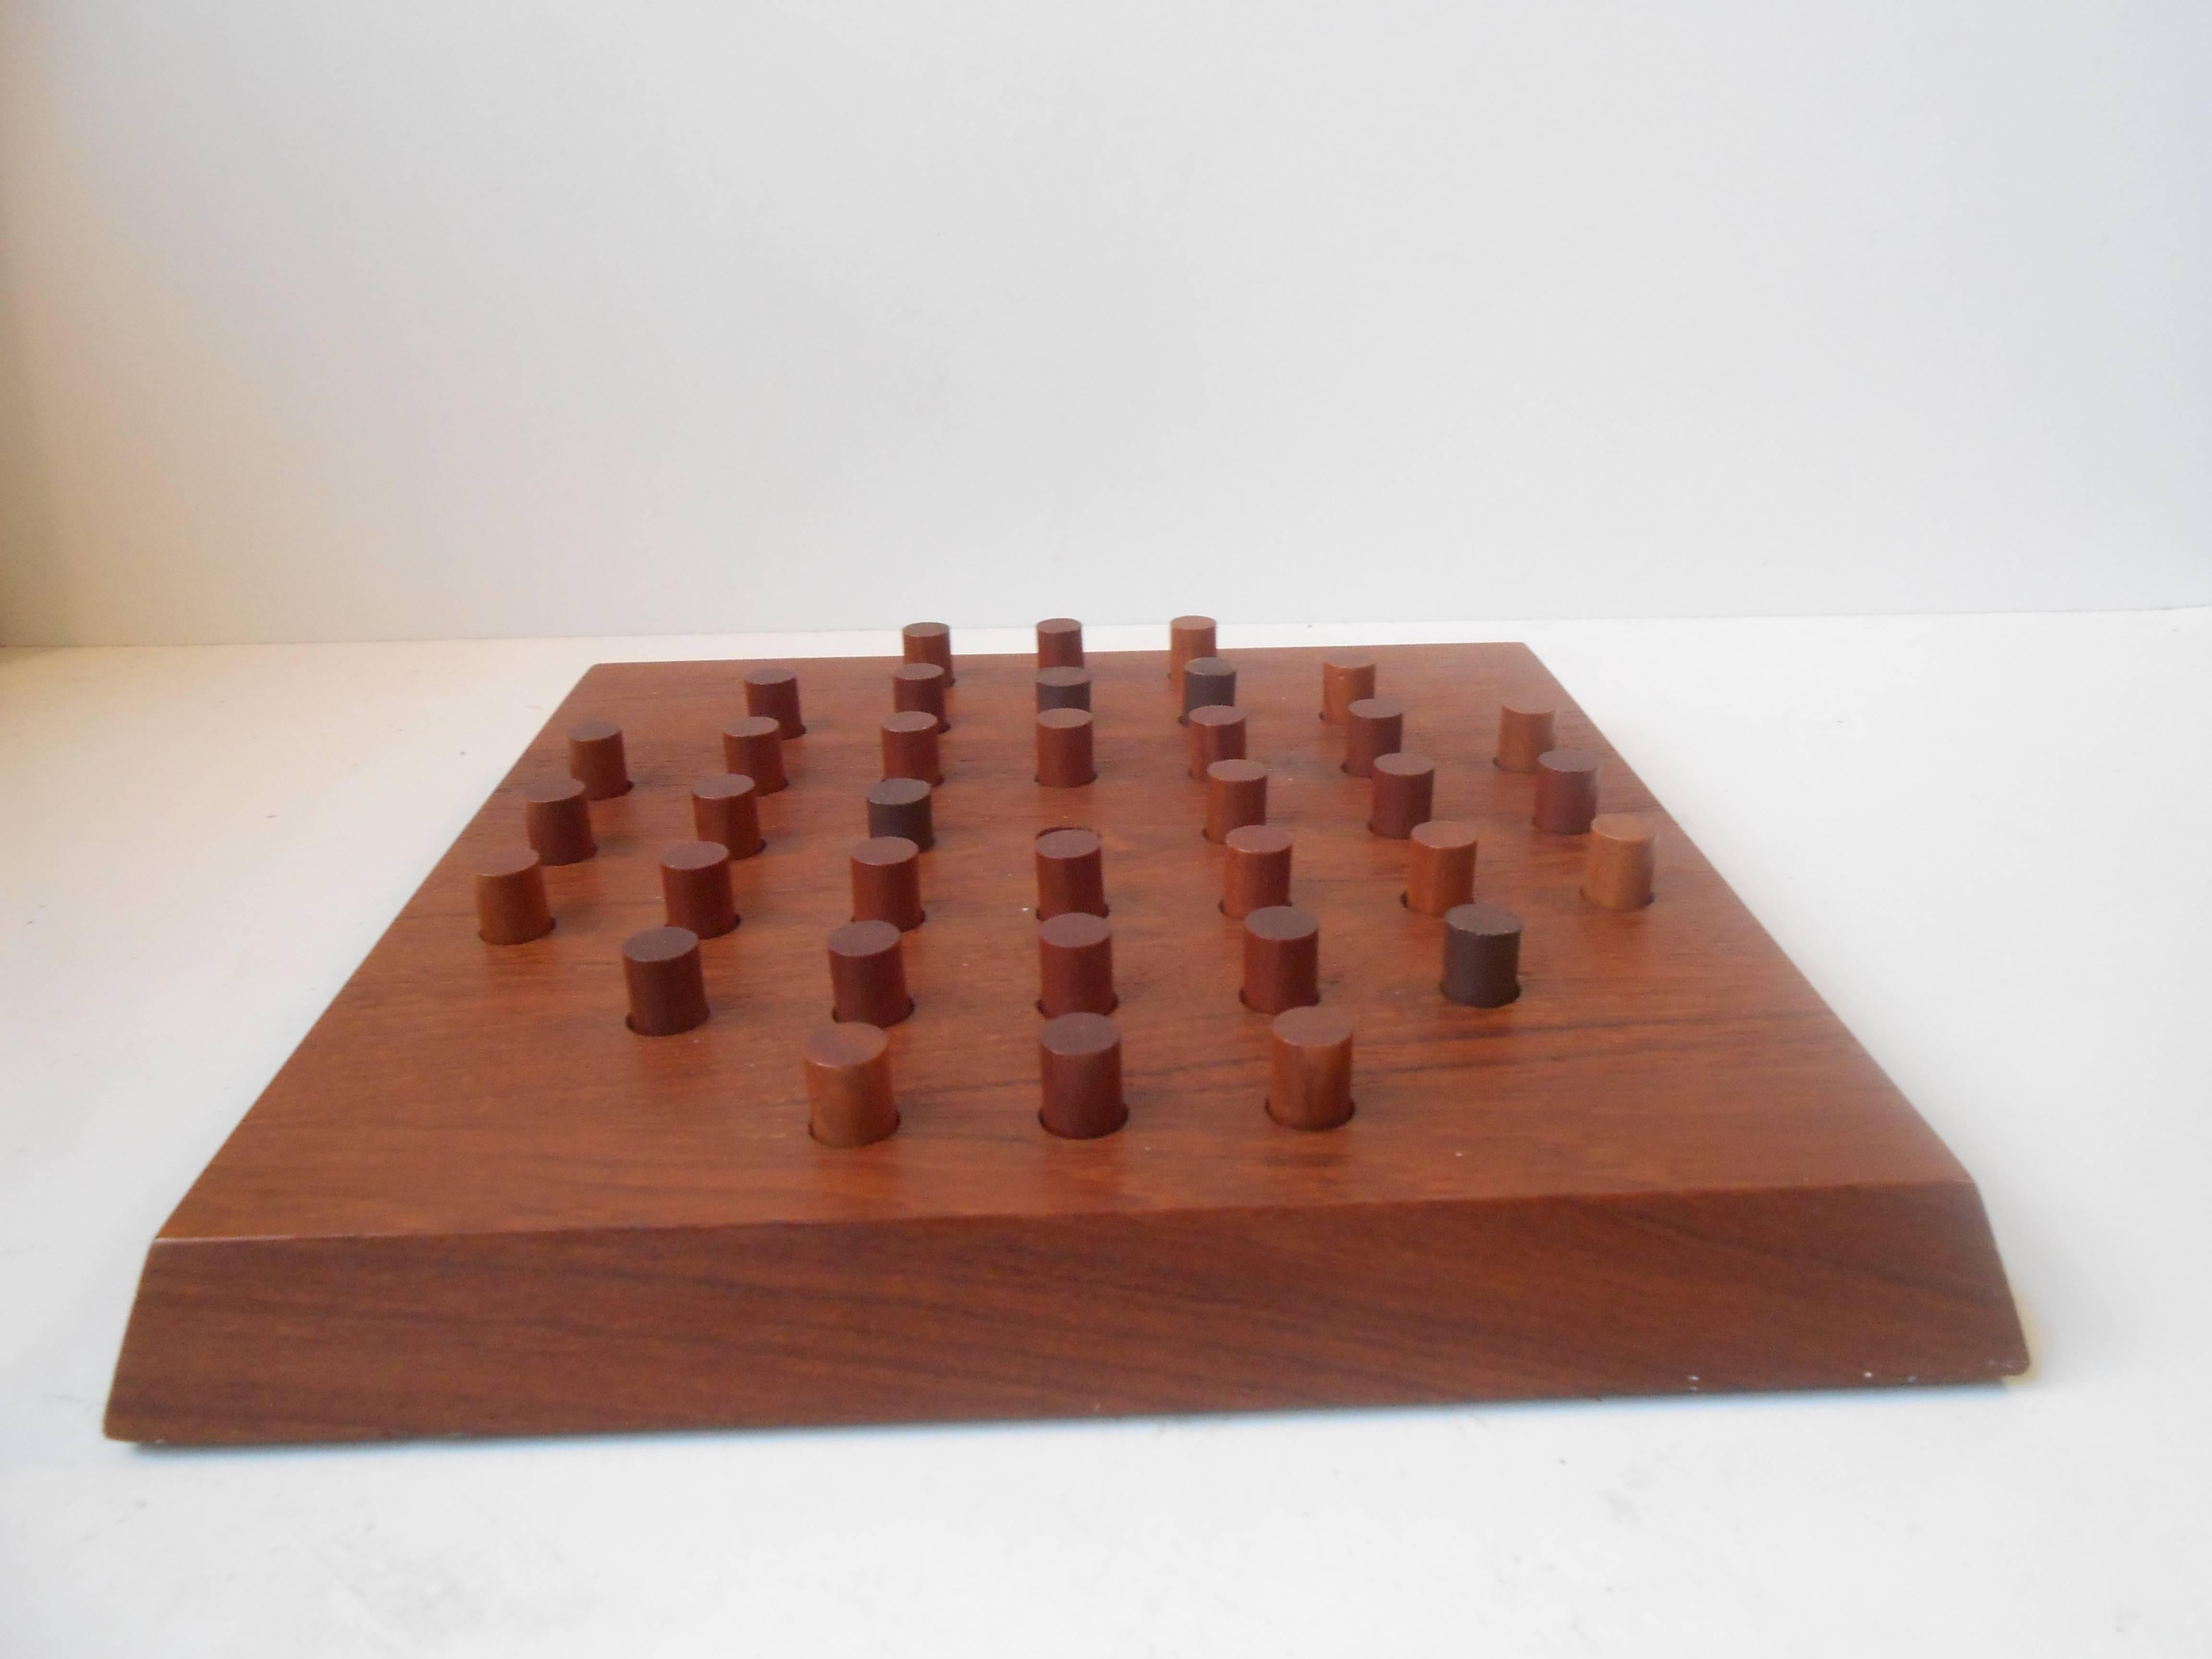 A solid teak Solitaire game designed by Piet Hein (1905-1996) in the 1950s. Manufactured by Skjode in Skjern, Denmark, during the 1960s. Stamped underneath: Piet Hein, Skjøde, Denmark. Measurements: 25 x 25 cm (10 x 10 inches). Very nice condition